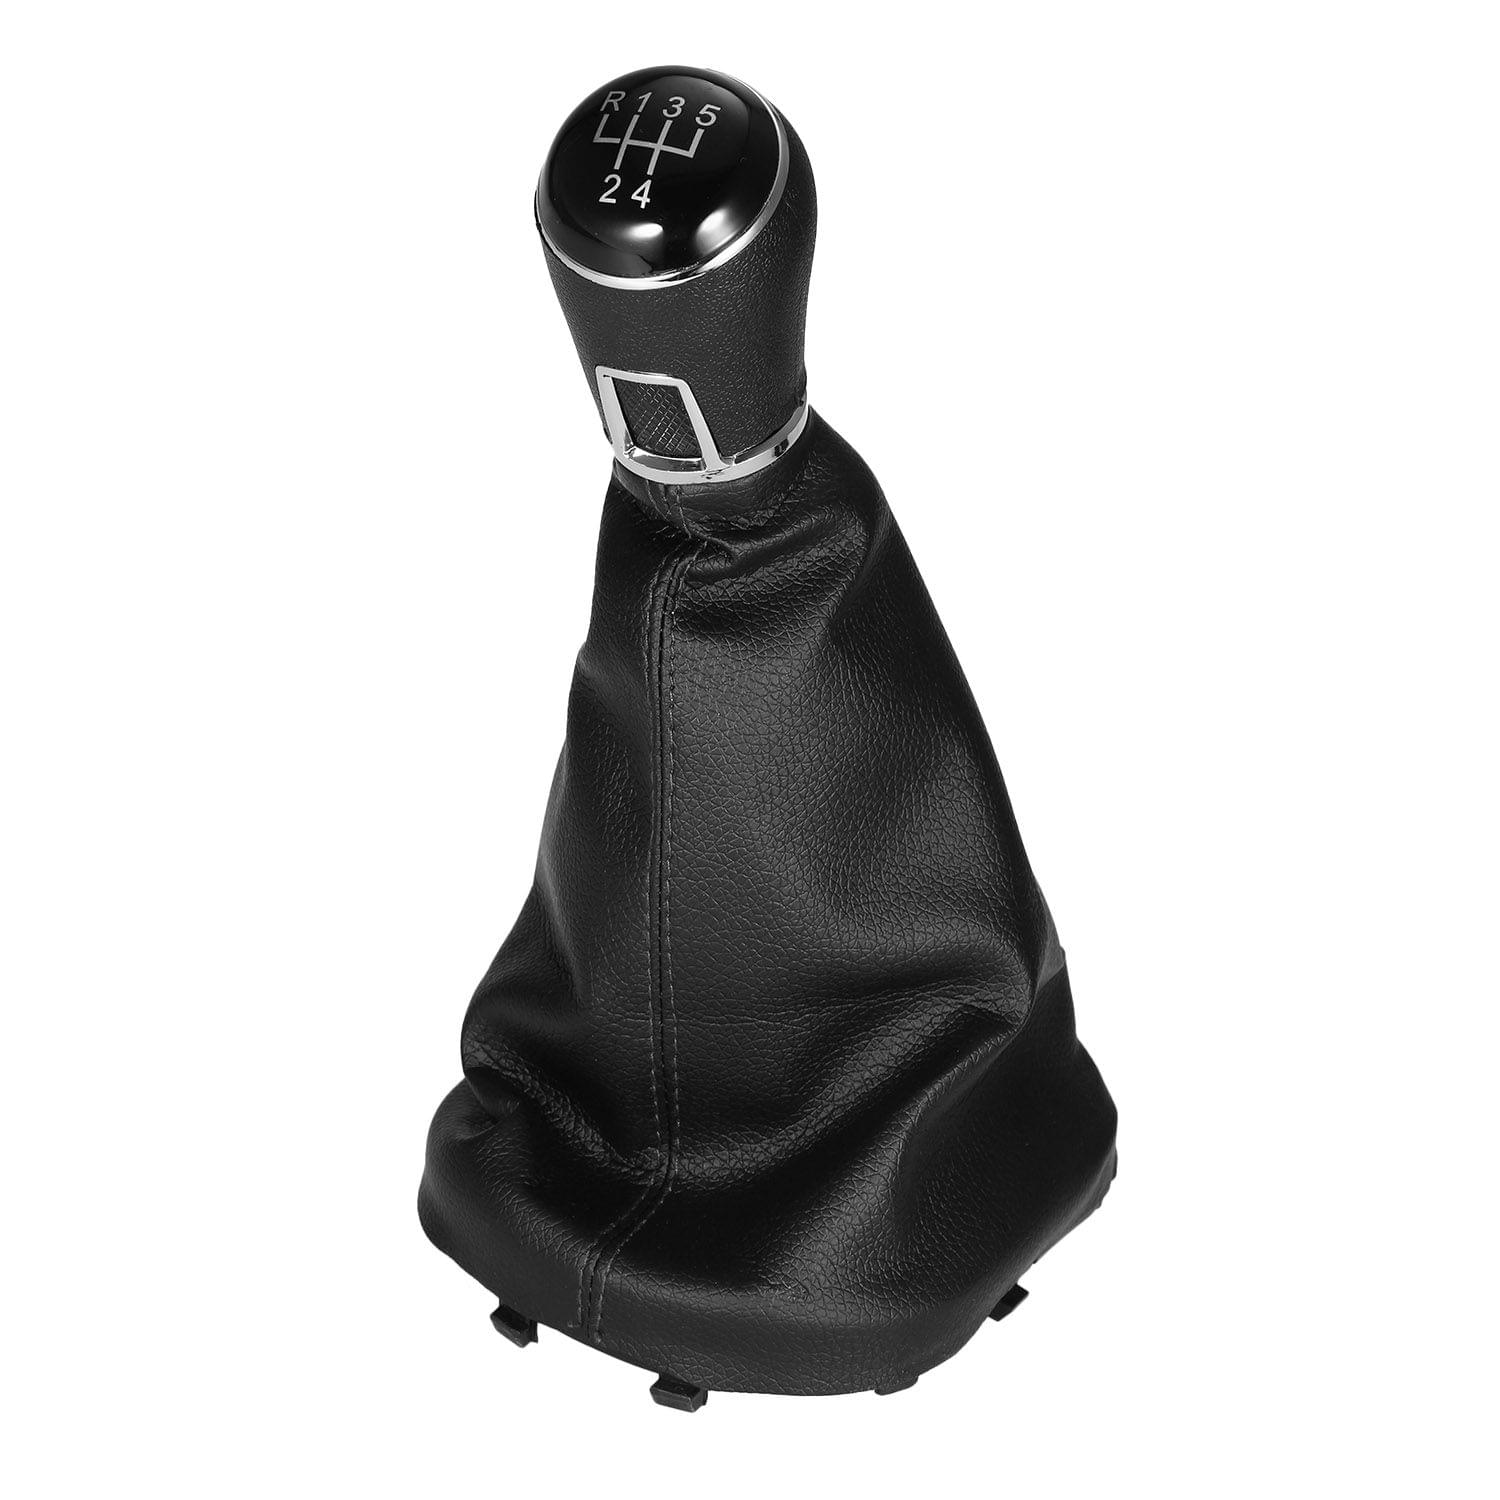 5 Speed Gear Knob Shift Stick Gaiter Replacement for VW